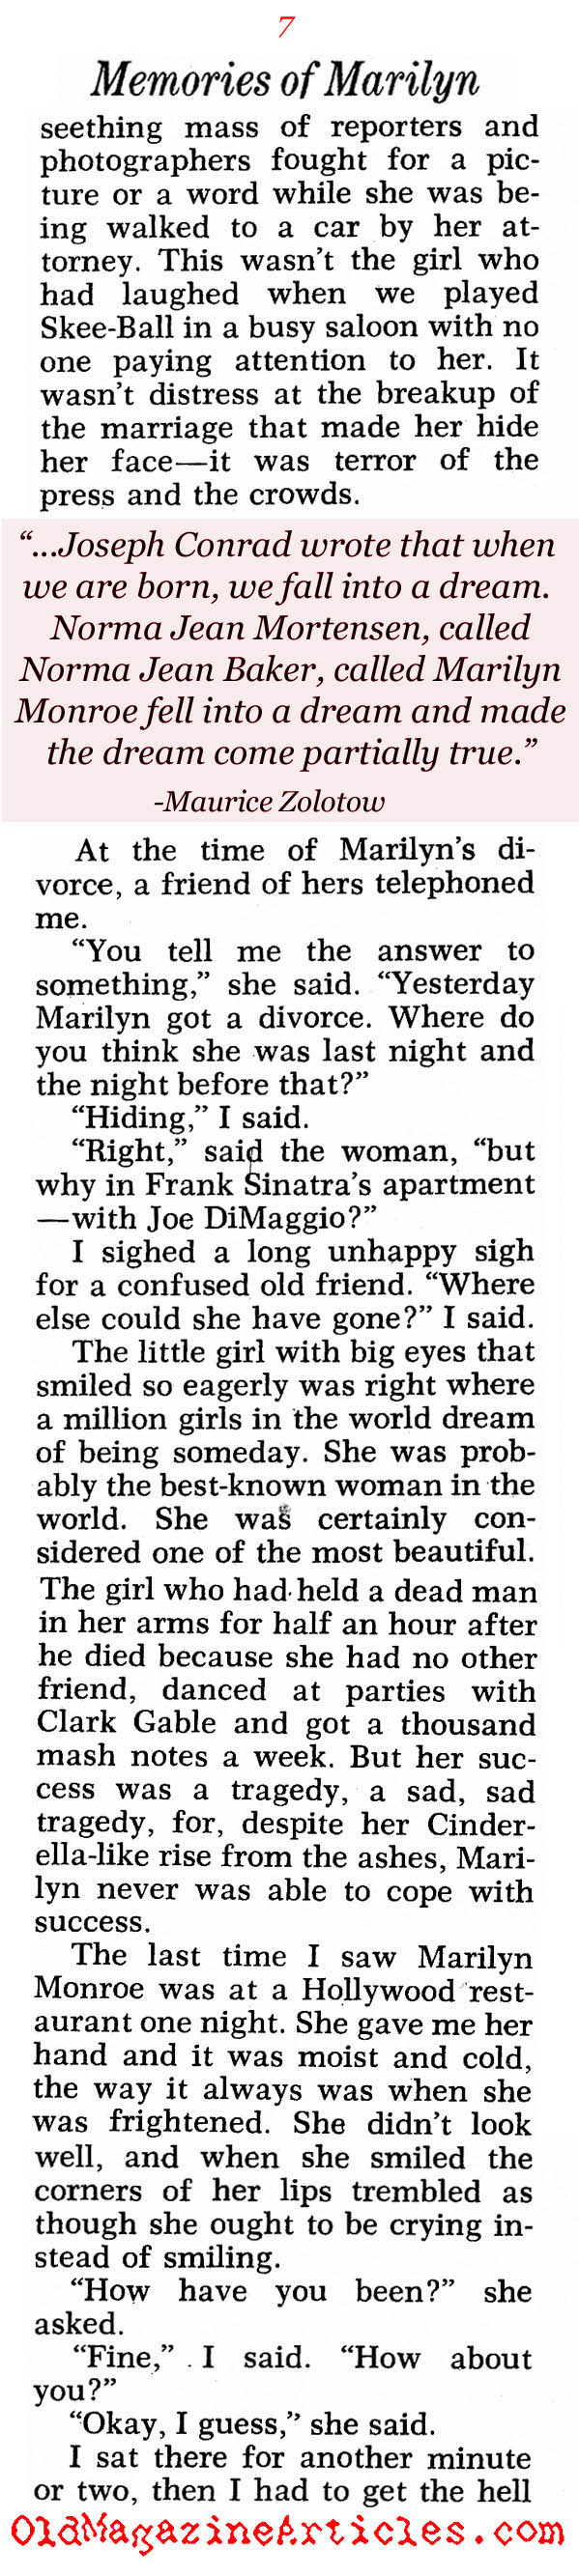 Warm Recollections of Marilyn (Pageant Magazine, 1971)